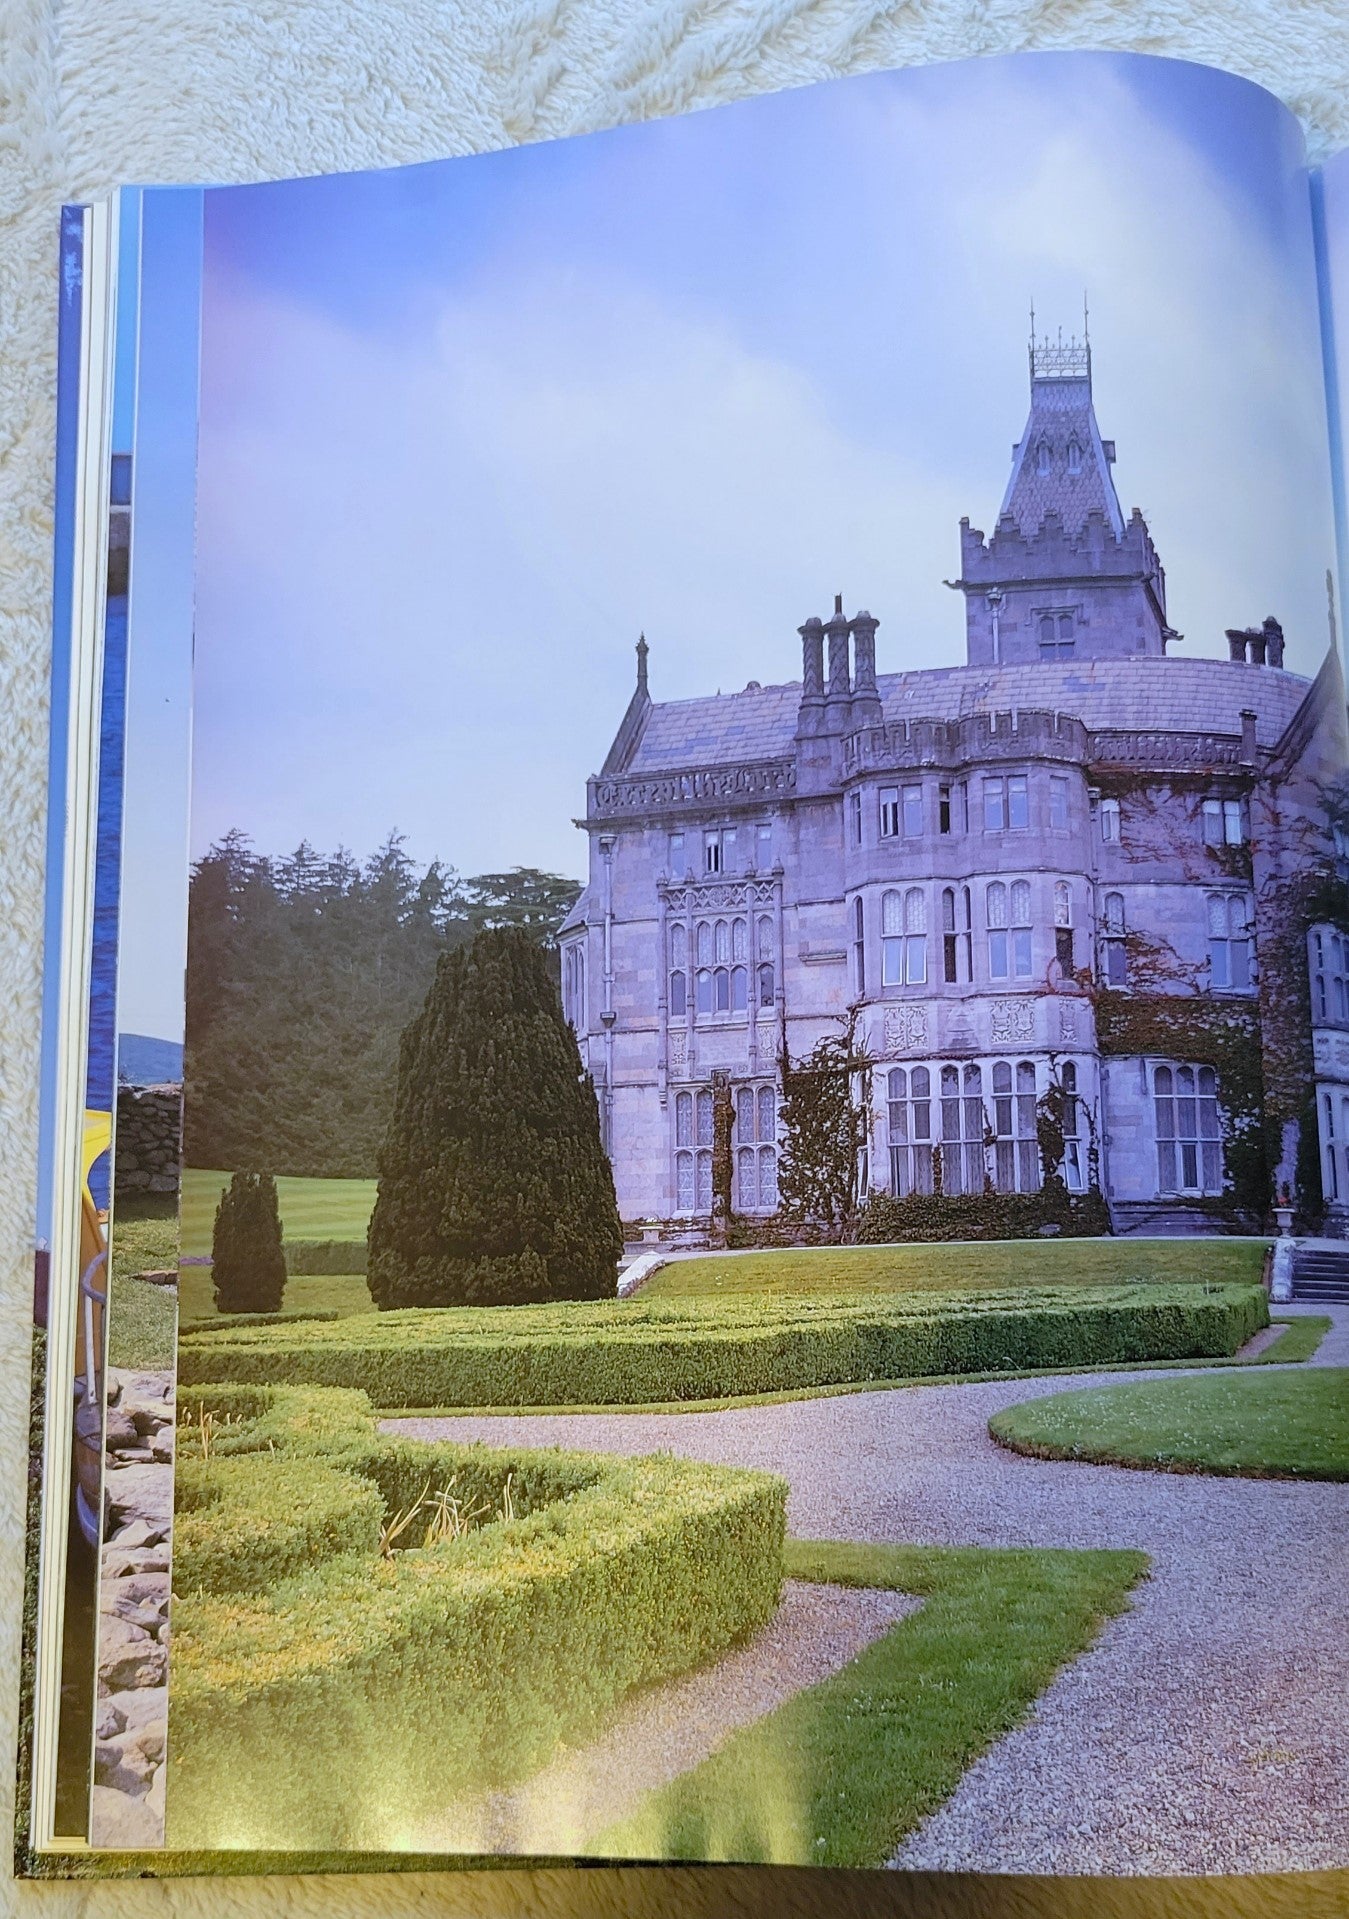 Used book for sale, travel photography, “Ireland: A Photographic Tour” by Carol W. Highsmith and Ted Landphair, published by Random House, 1998. View of castle photograph.